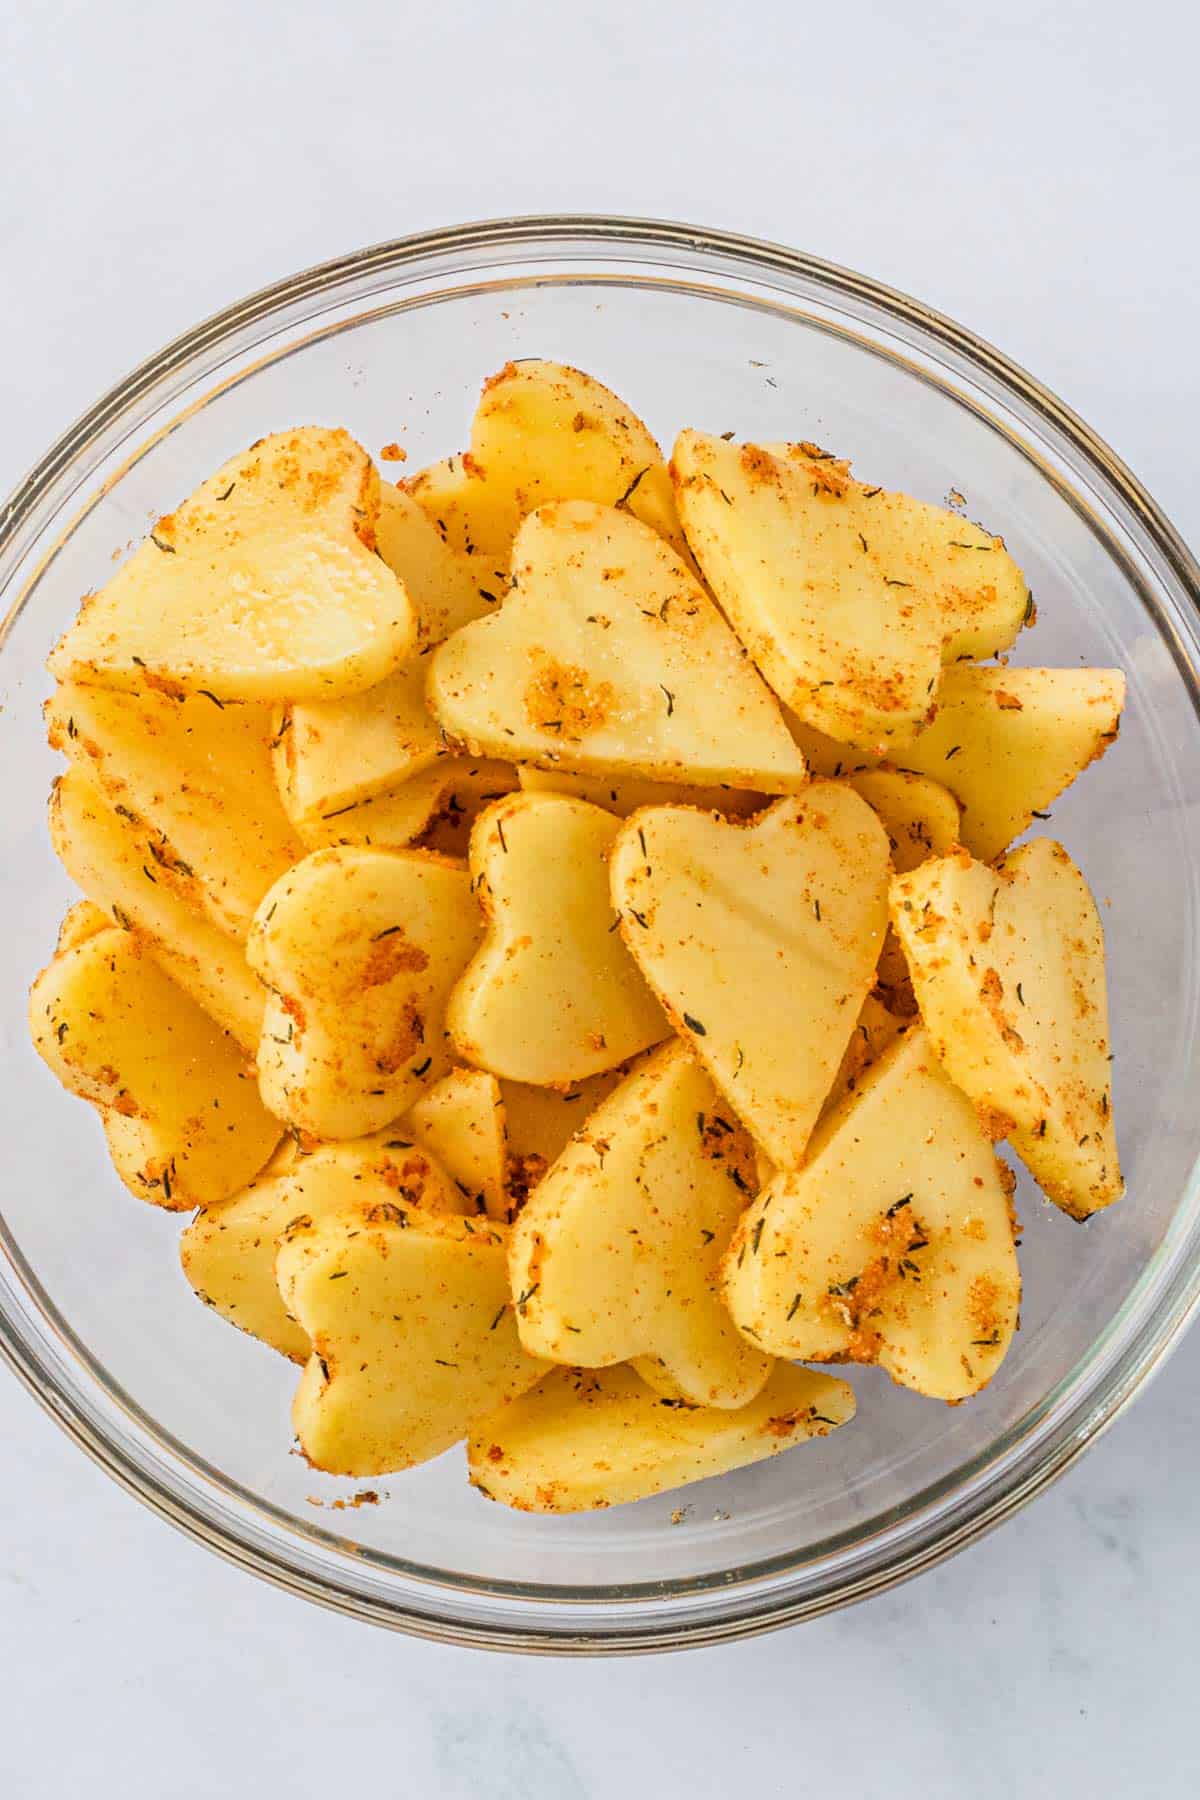 sliced potatoes in a bowl with seasonings